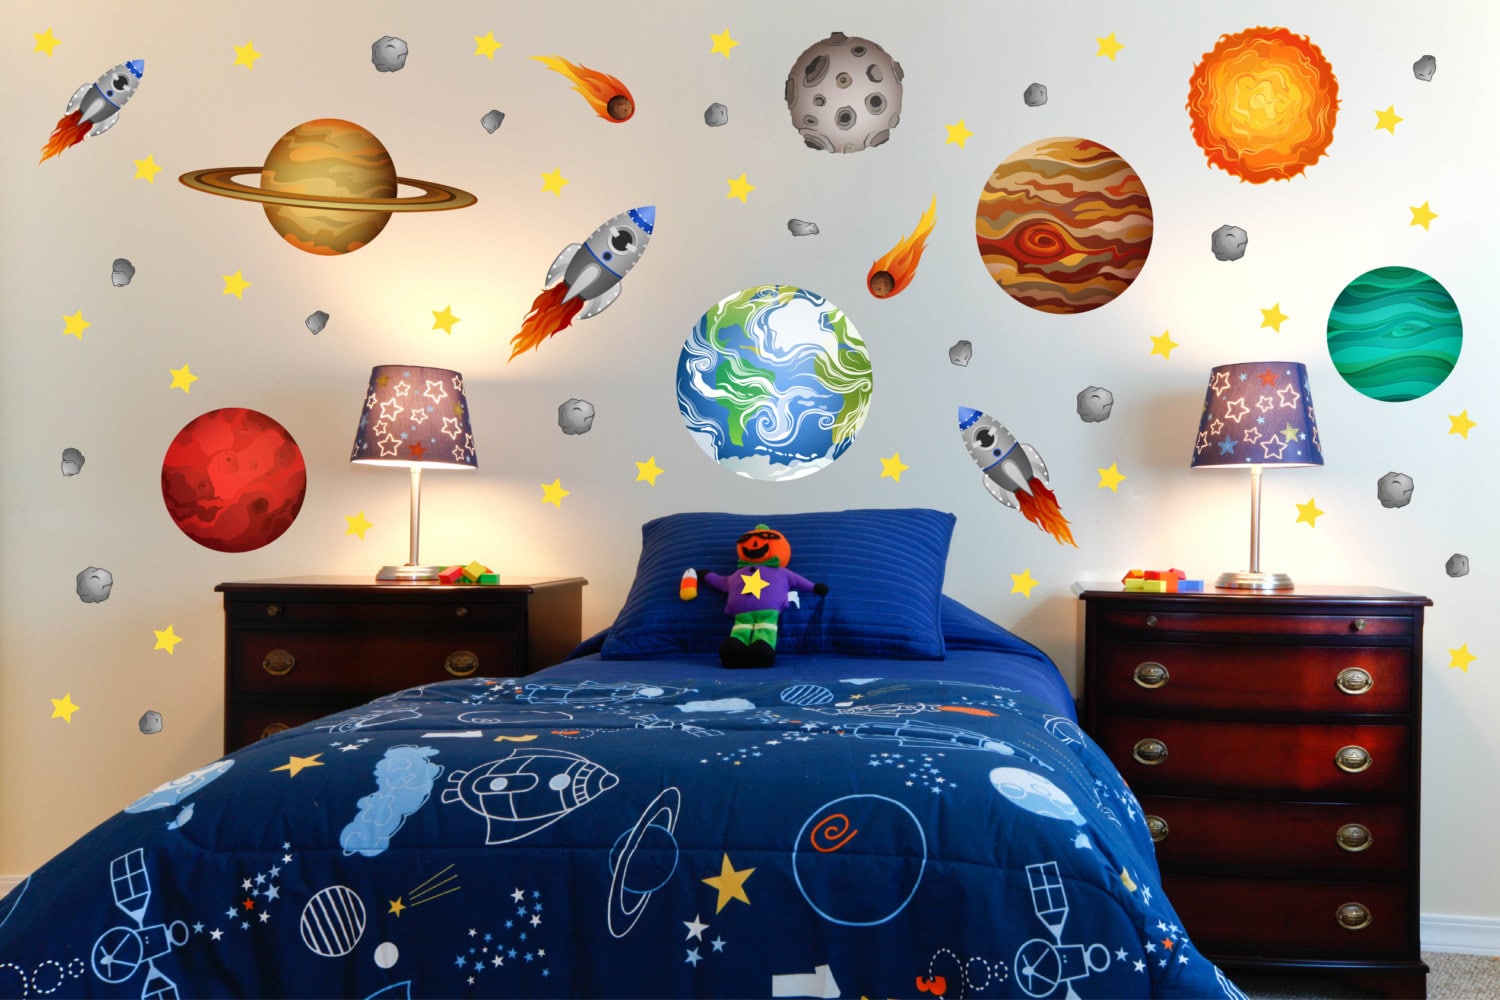 Cosmic Dreams: Outer Space-Themed Kids’ Room Decor